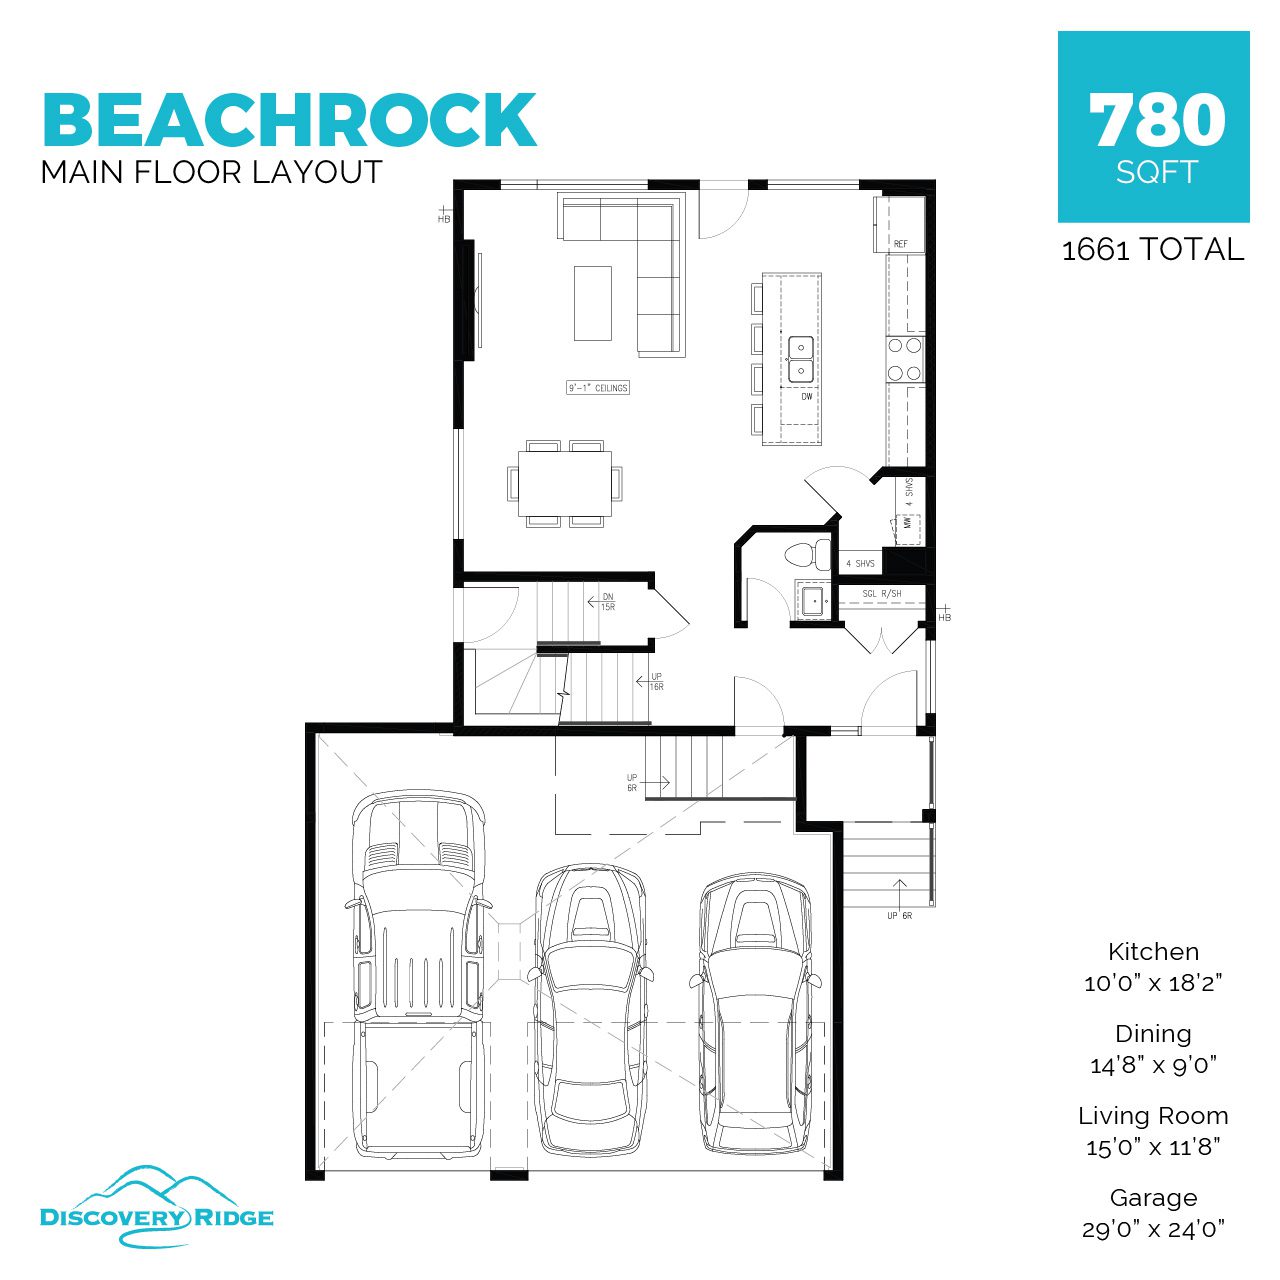 A floor plan for a two-storey home in Pilot Butte.